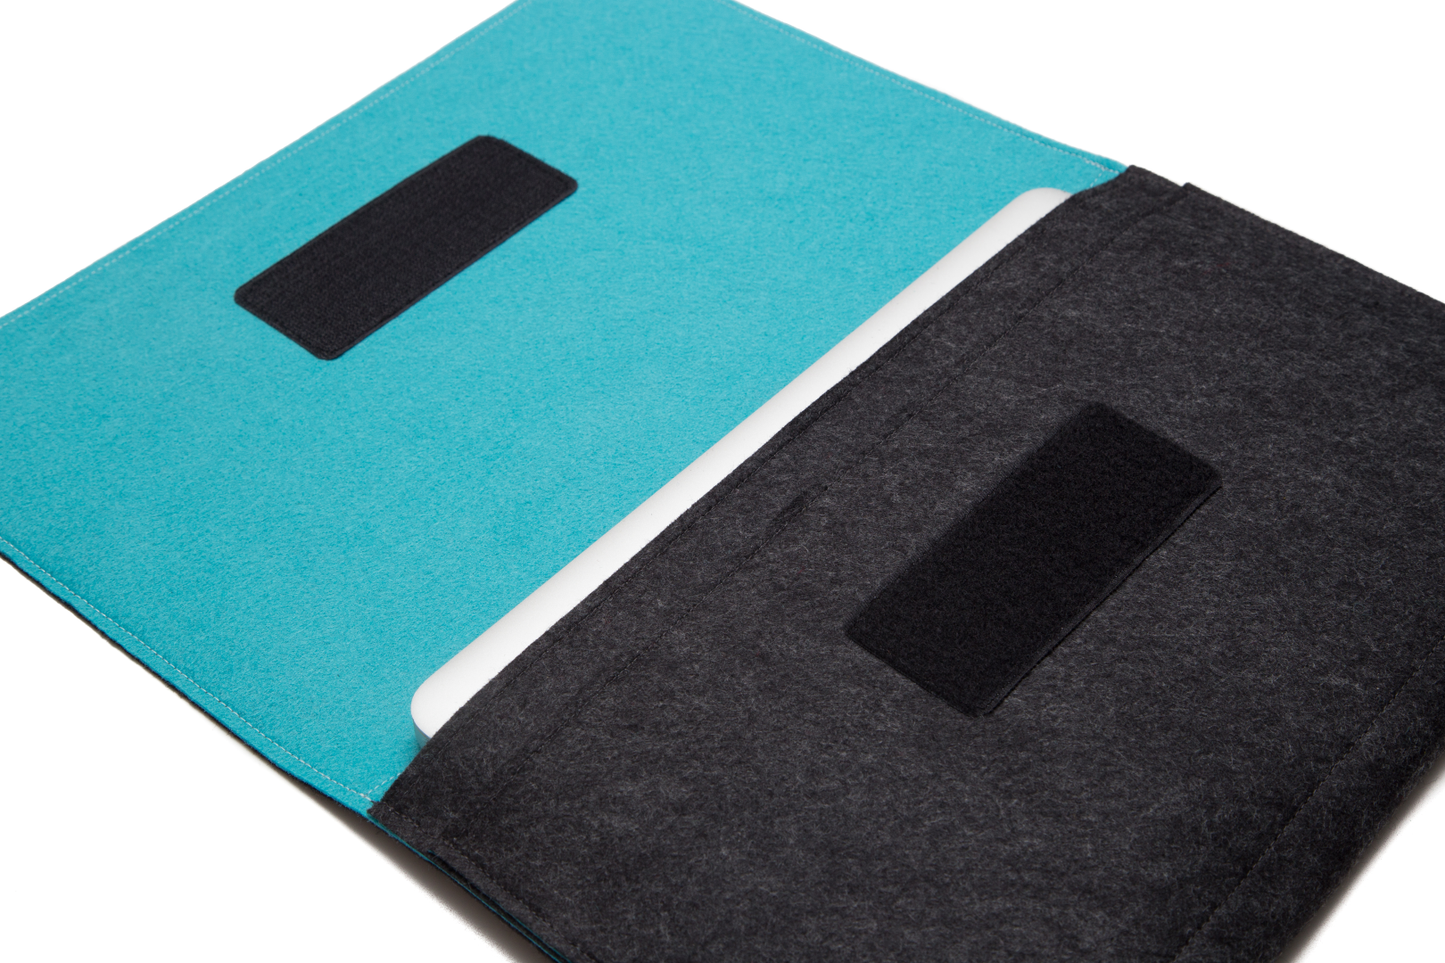 Handmade MacBook Cover - Charcoal & Turquoise